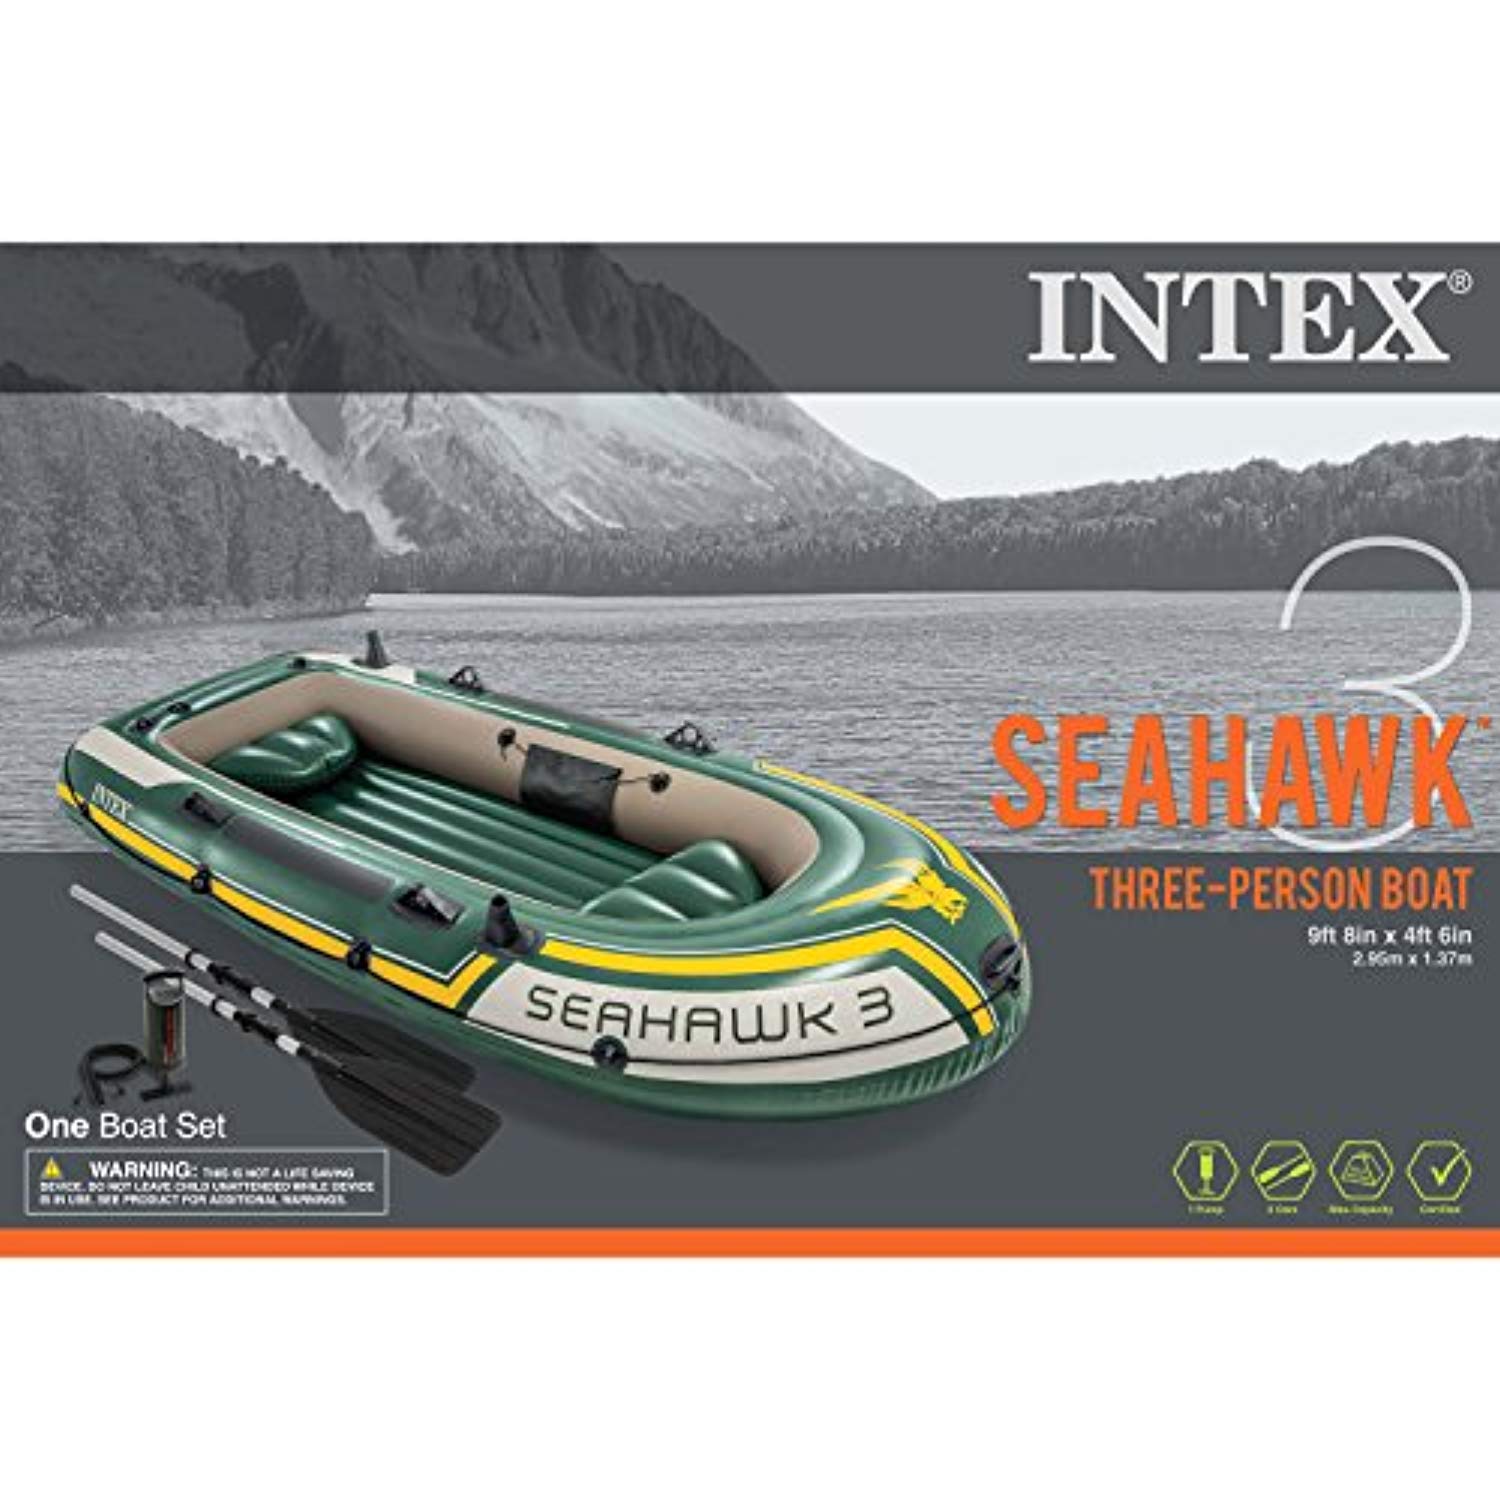 Seahawk 3, 3-Person Inflatable Boat Set with Aluminum Oars and High Ou